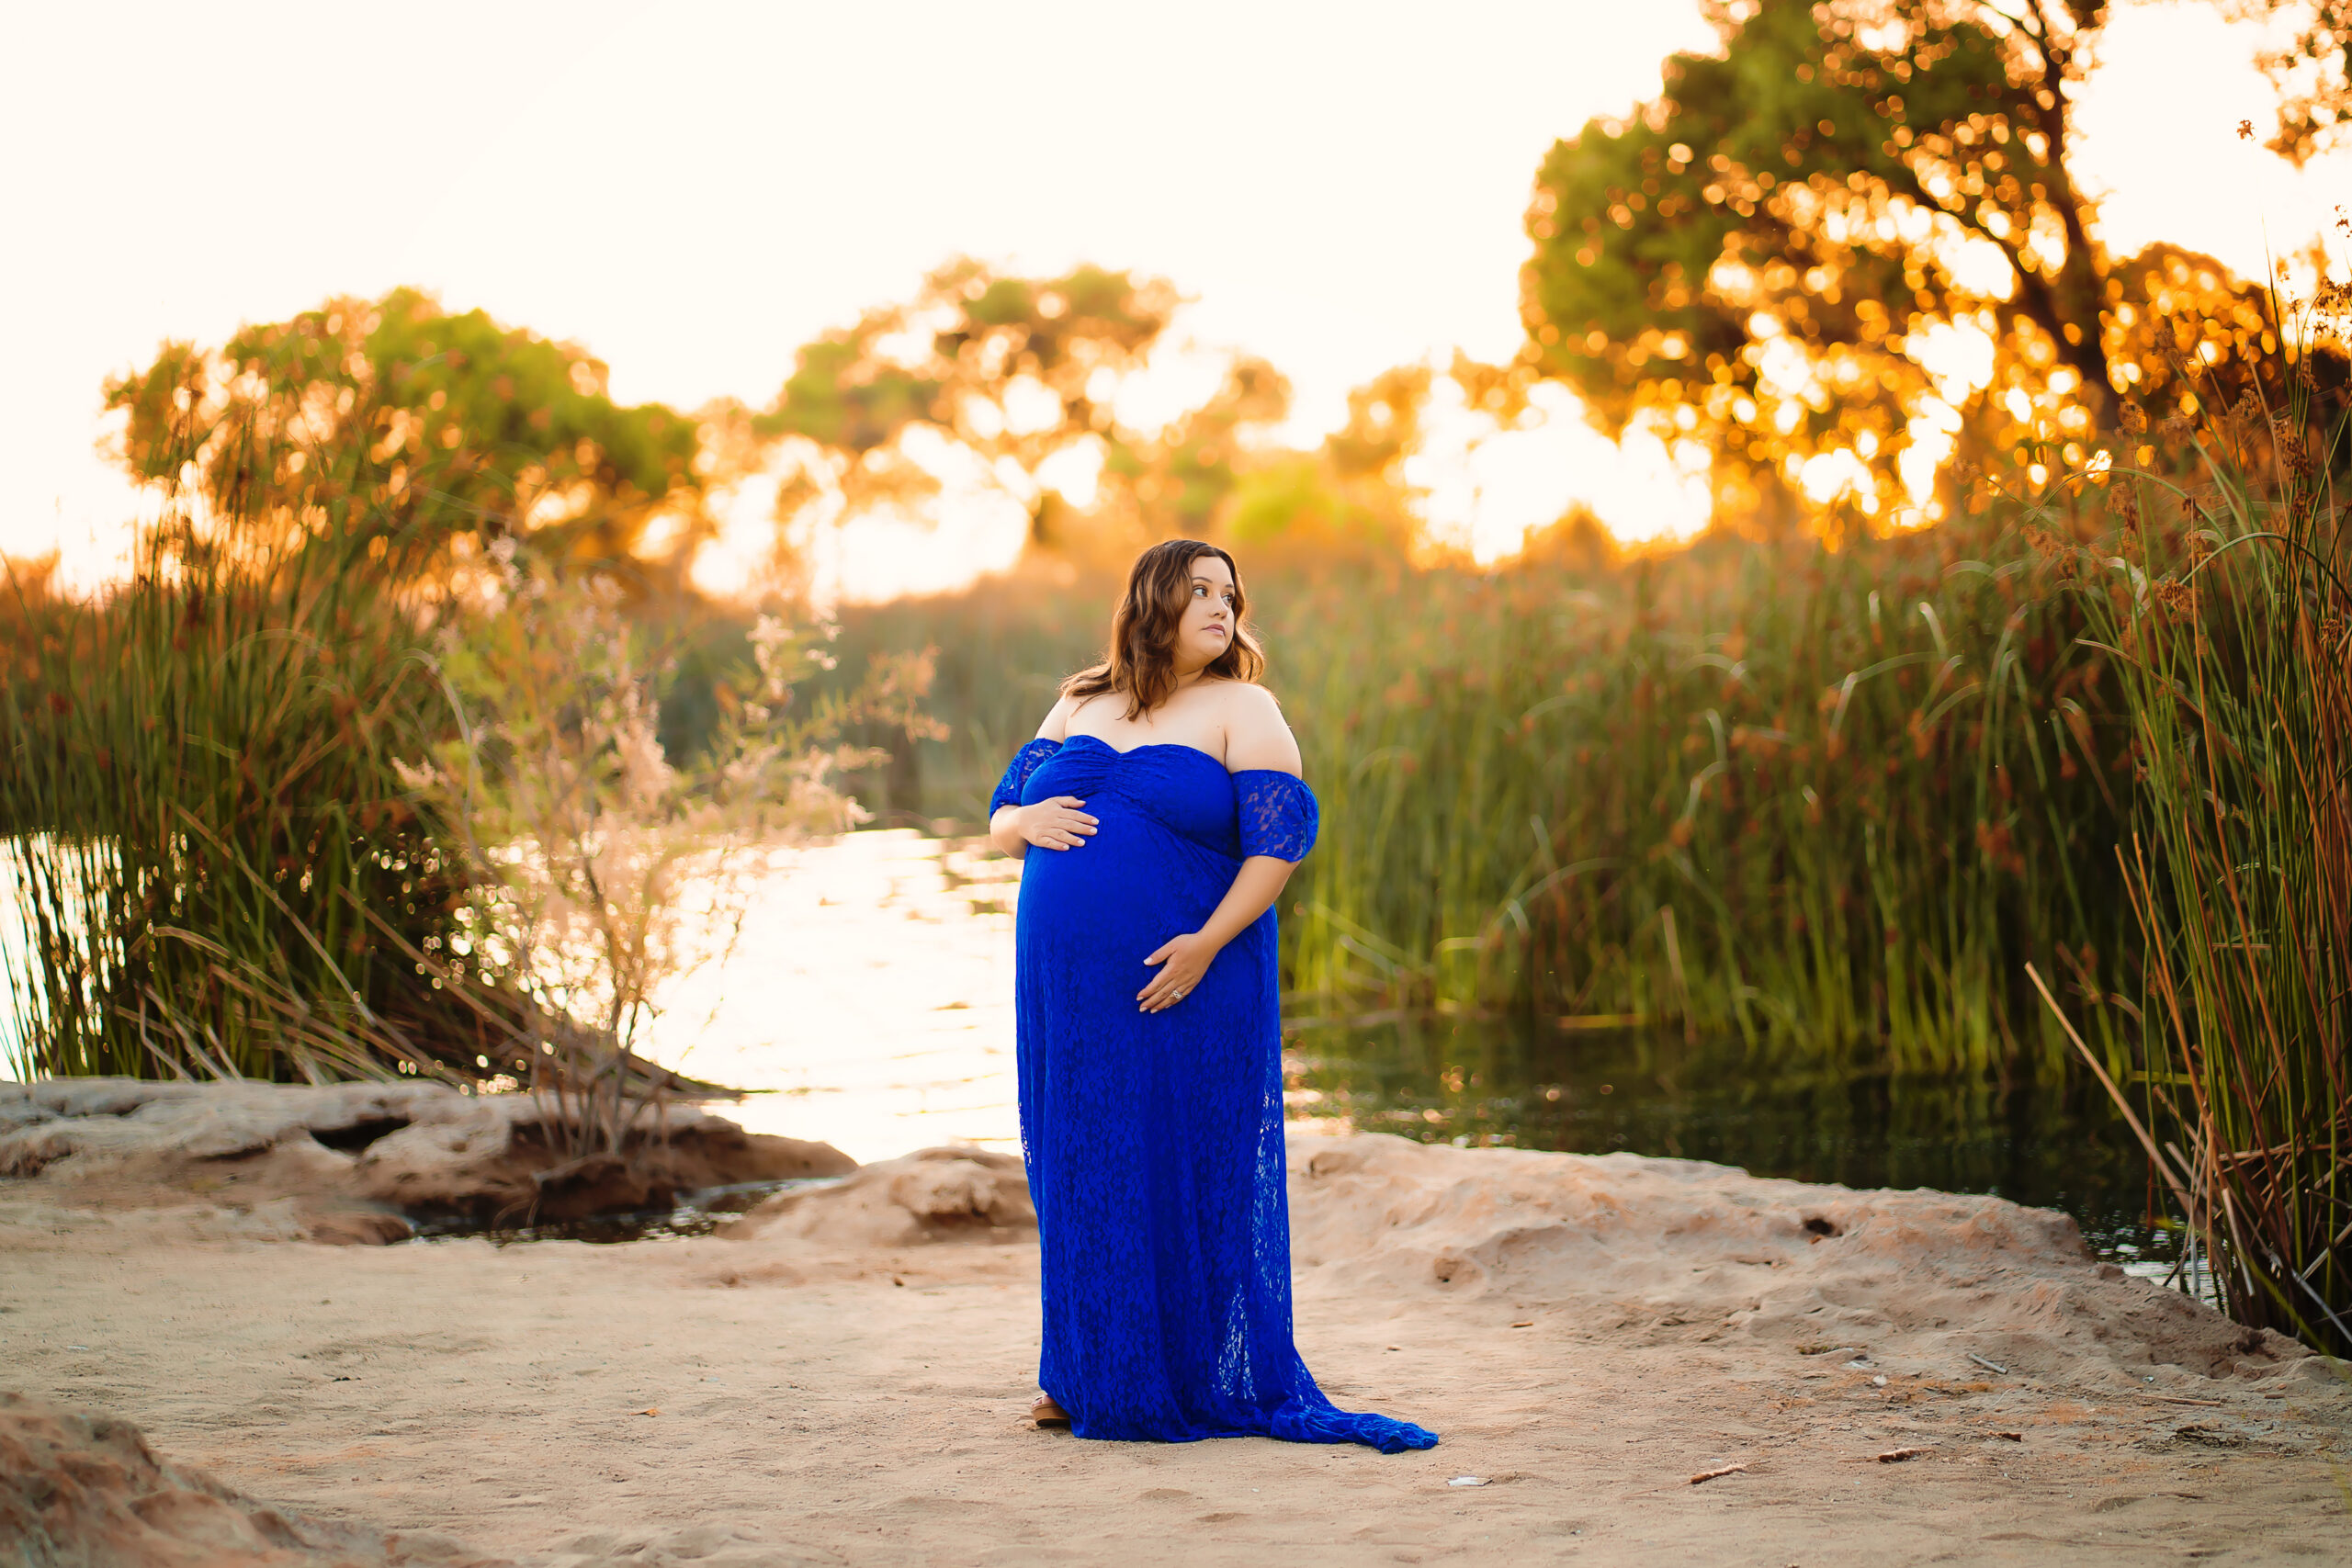 A woman wearing a royal blue maternity gown poses next to a lake as the sunset glows behind her during her maternity photo session